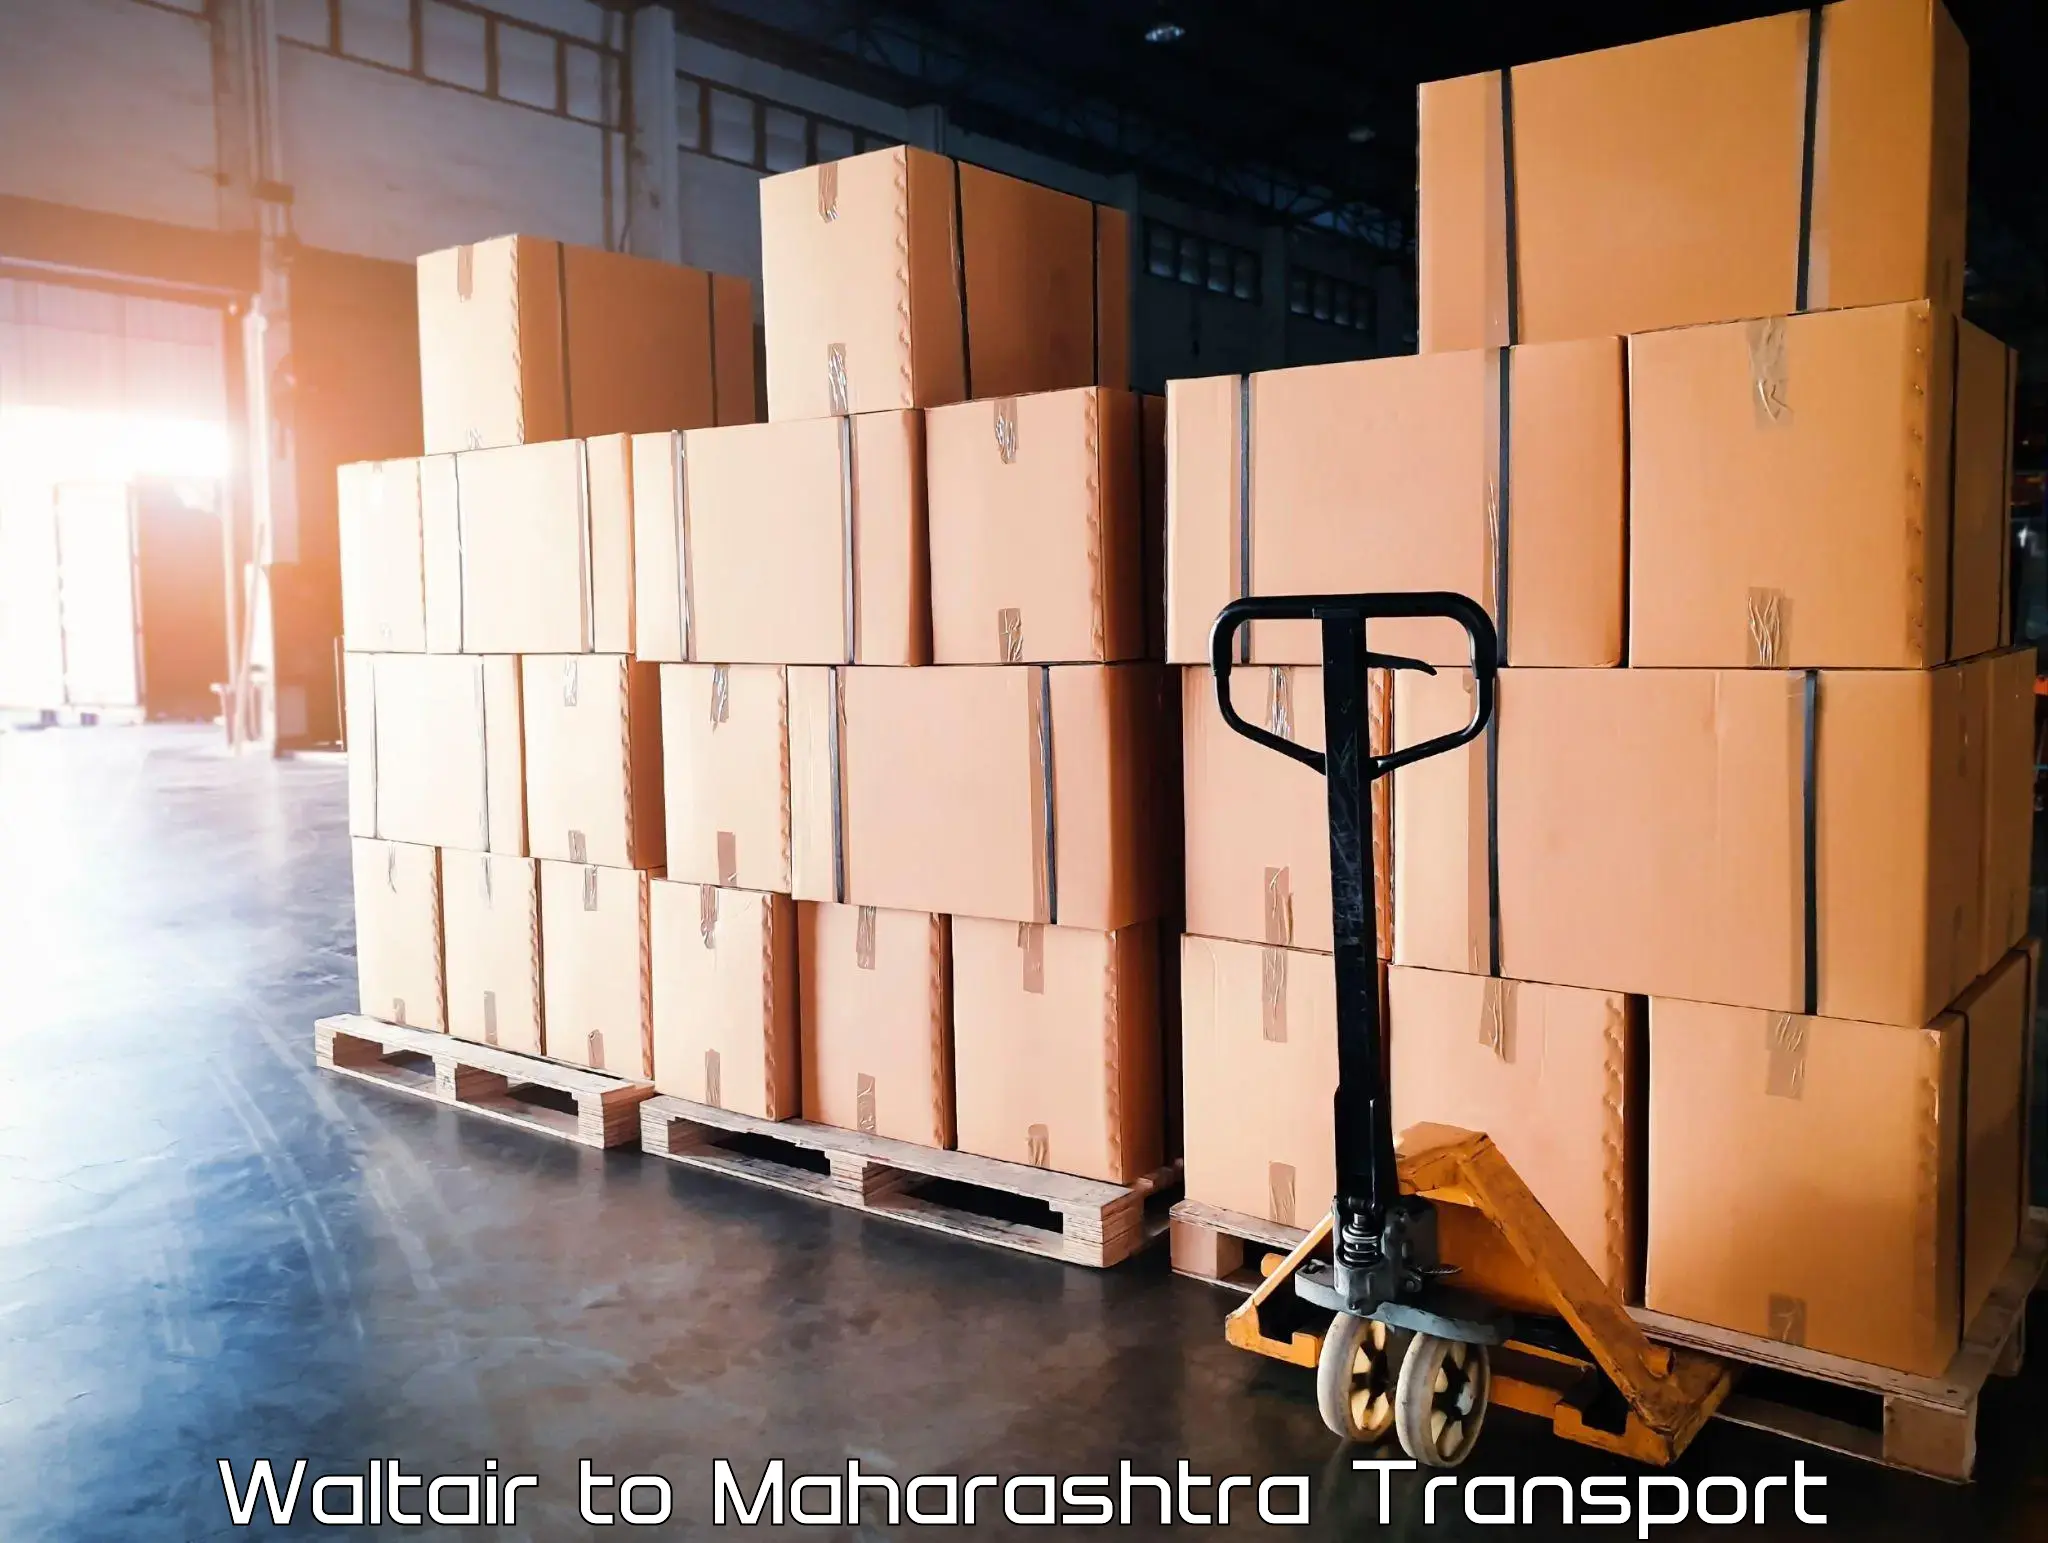 Transport bike from one state to another Waltair to Sangamner